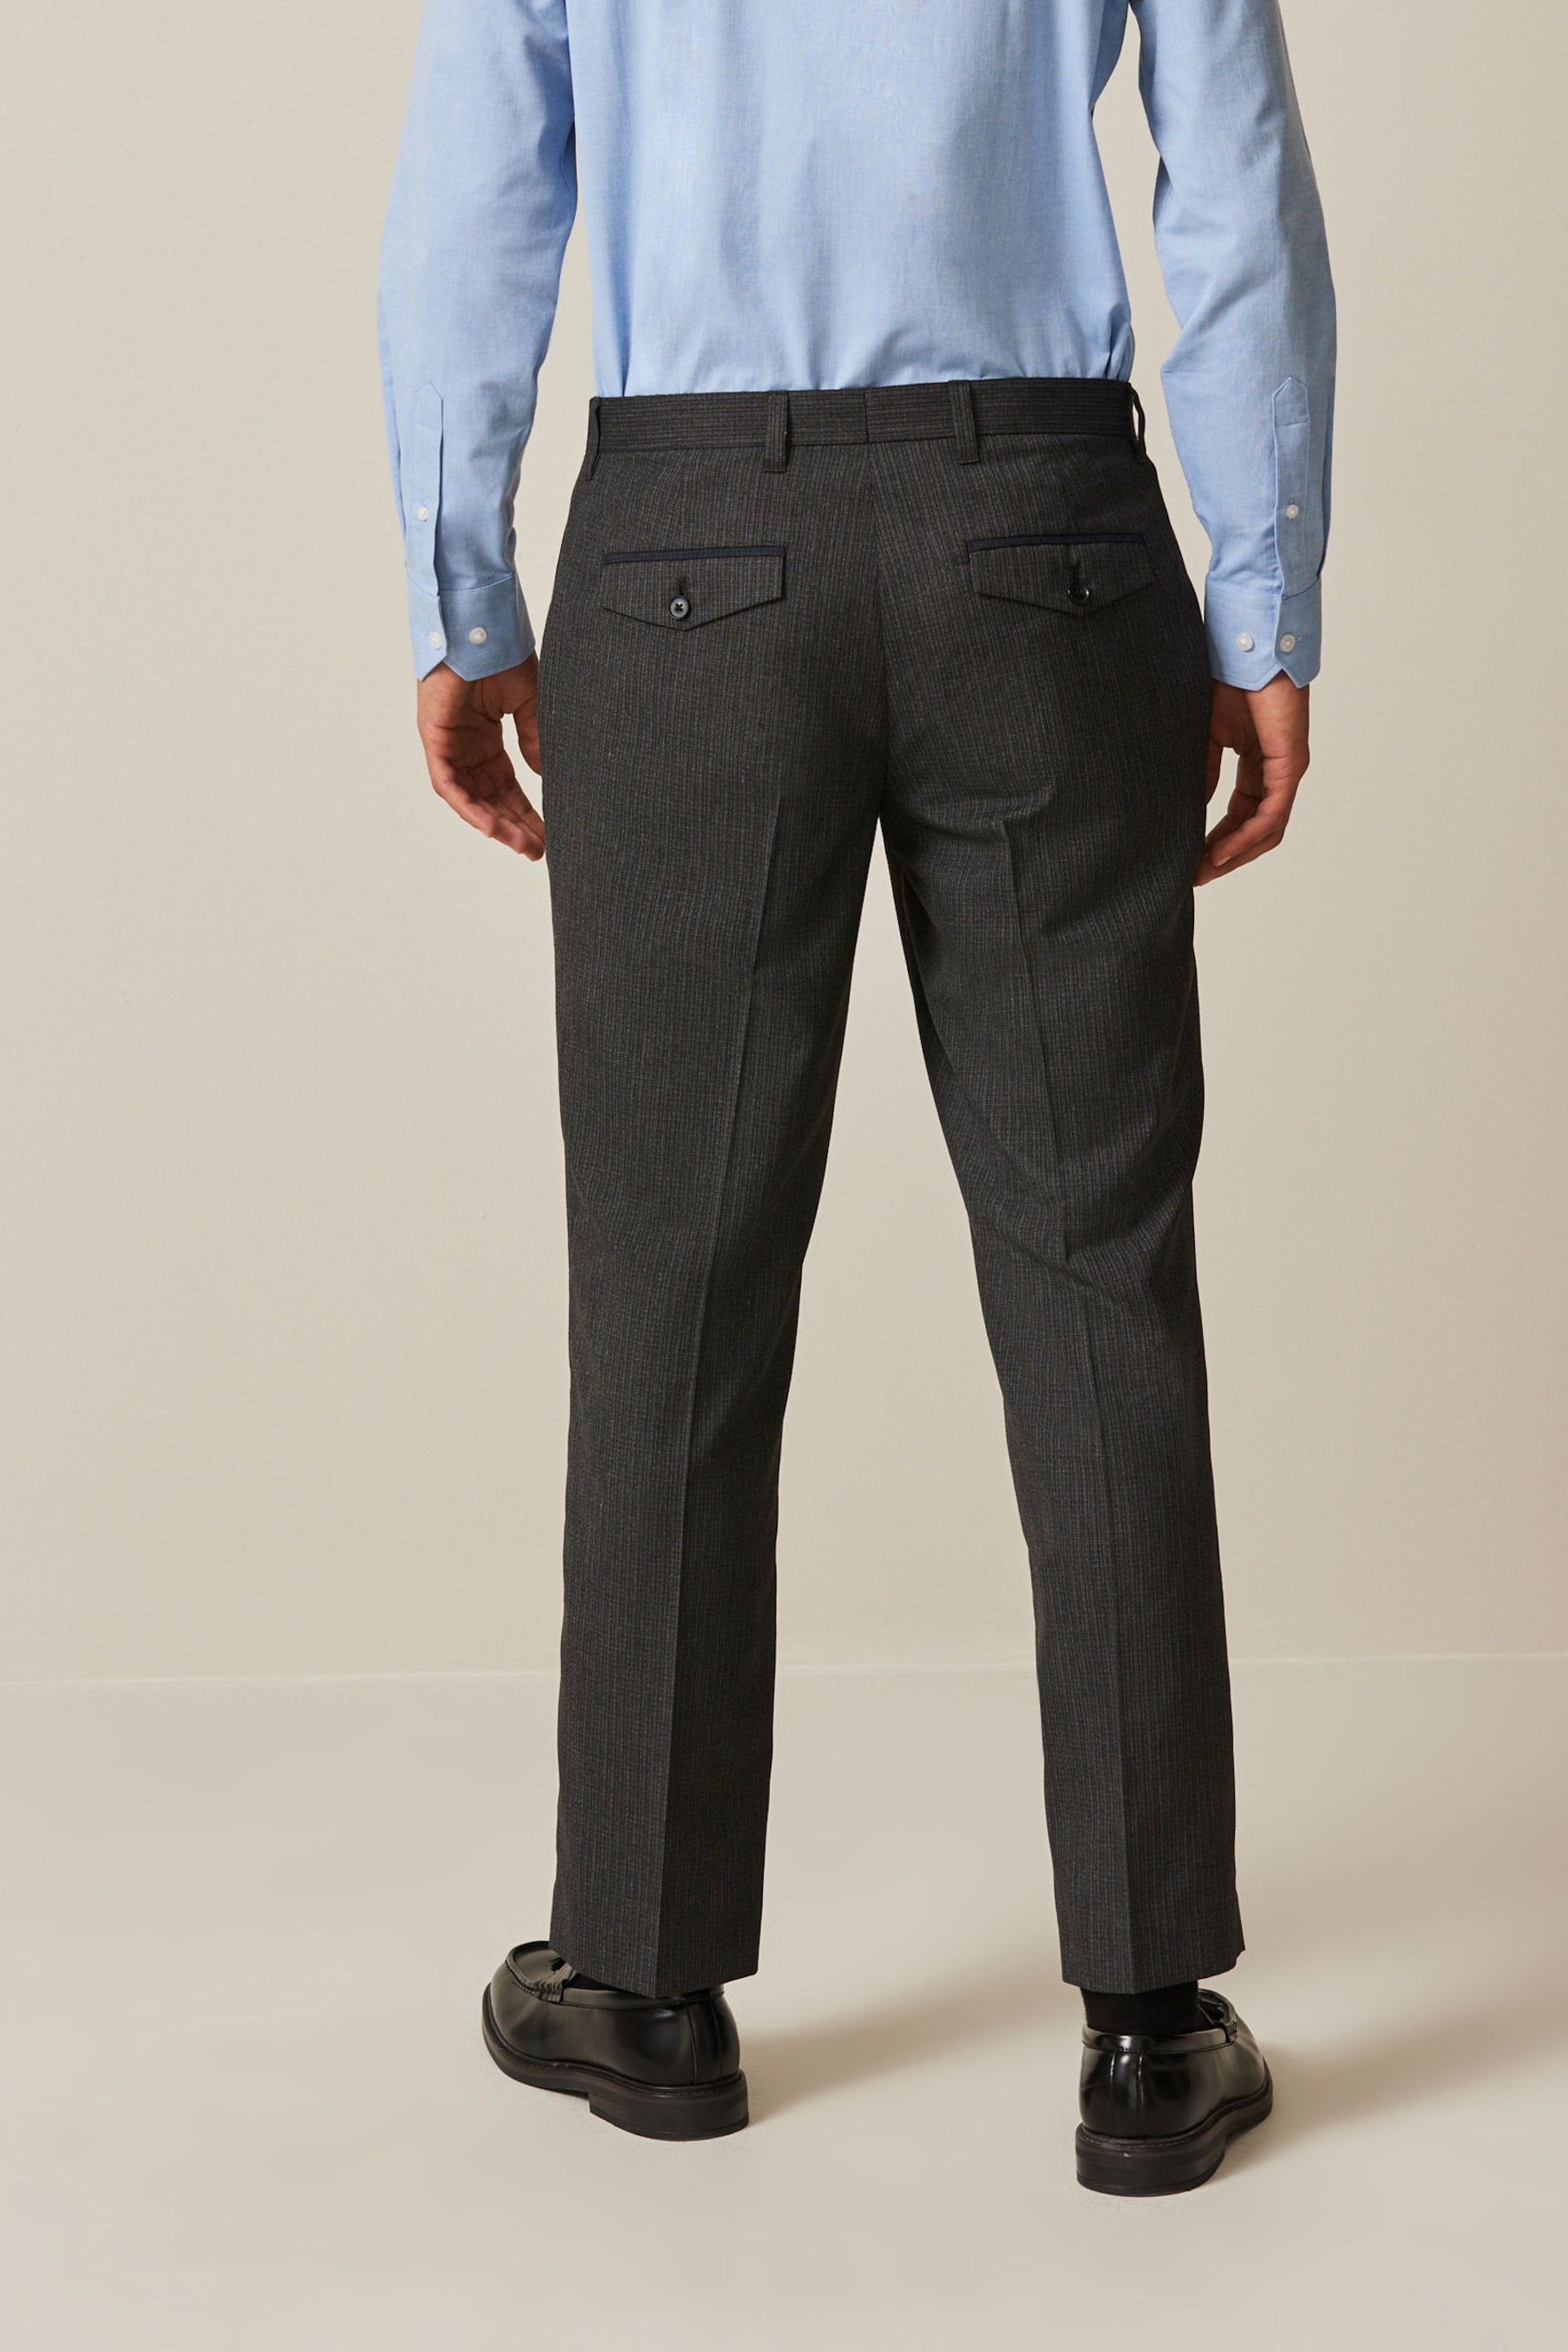 Charcoal Grey Textured Smart Trousers - Image 3 of 9